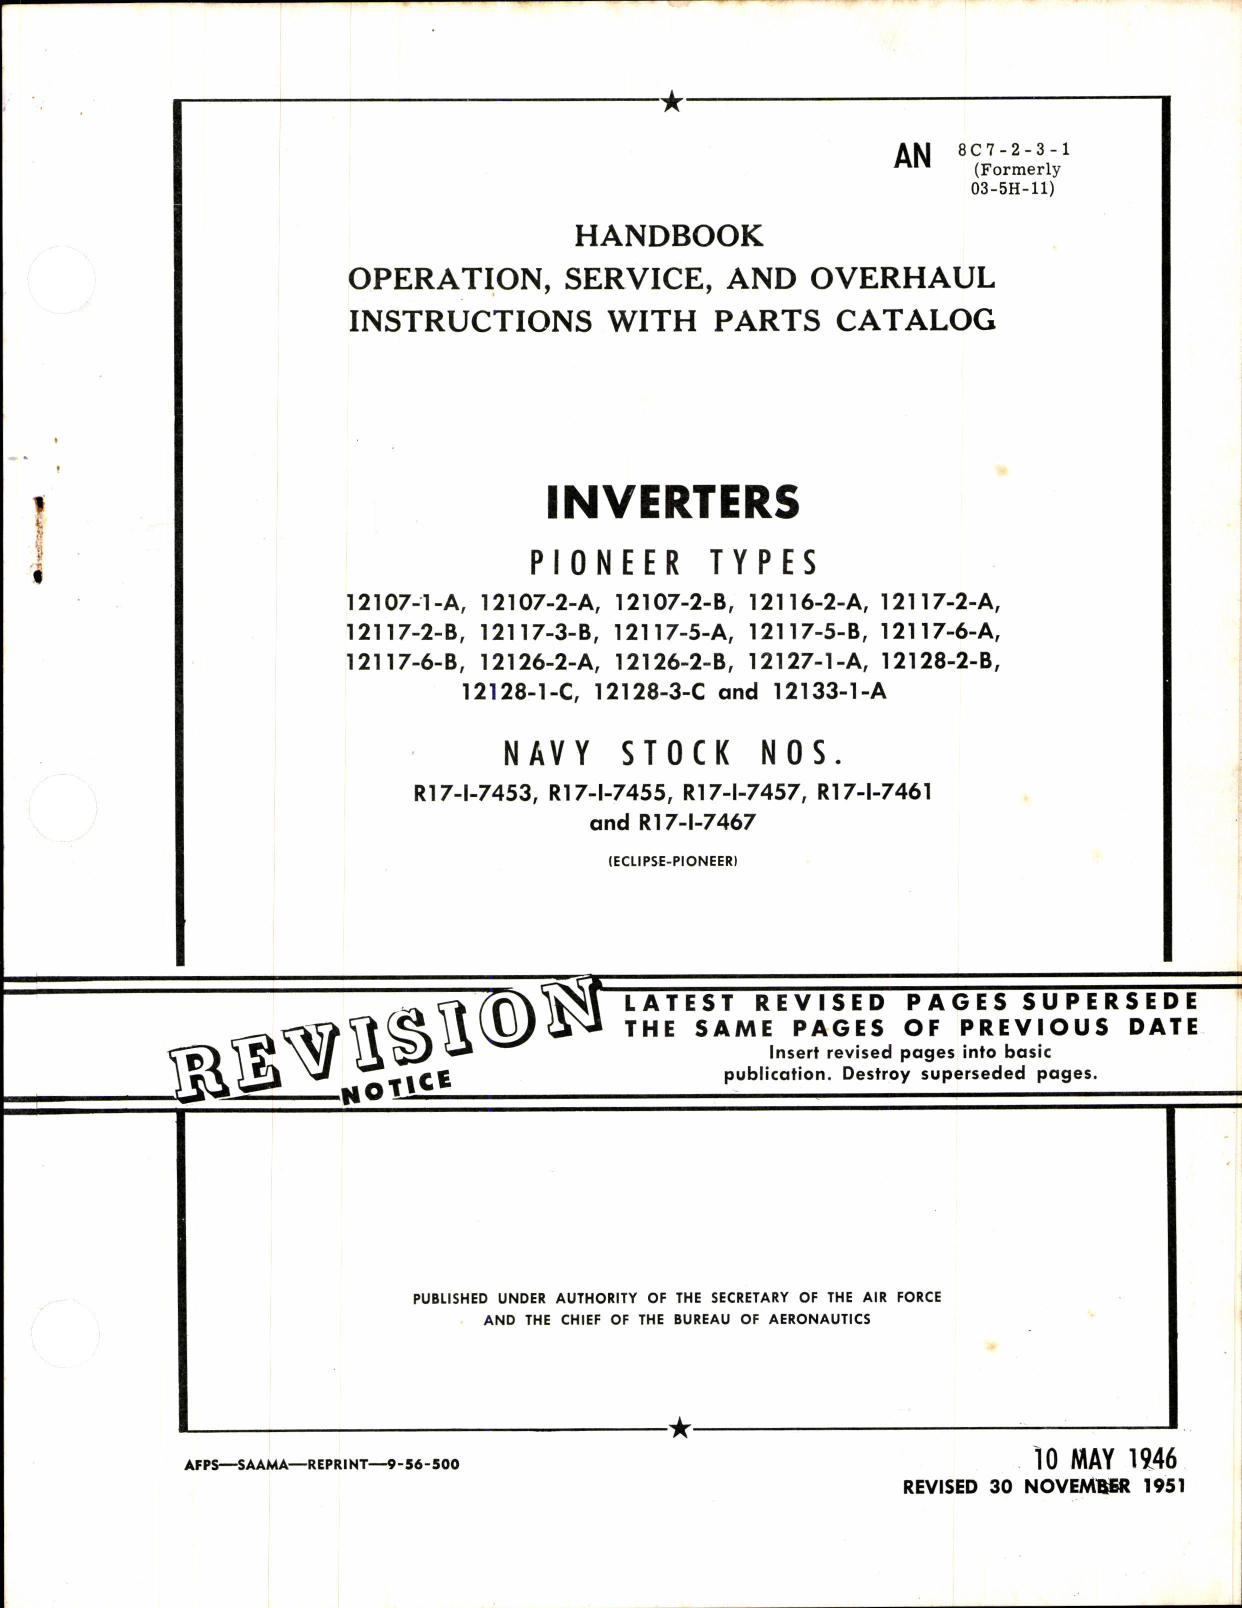 Sample page 1 from AirCorps Library document: Instructions w Parts Catalog for Inverters Pioneer Types